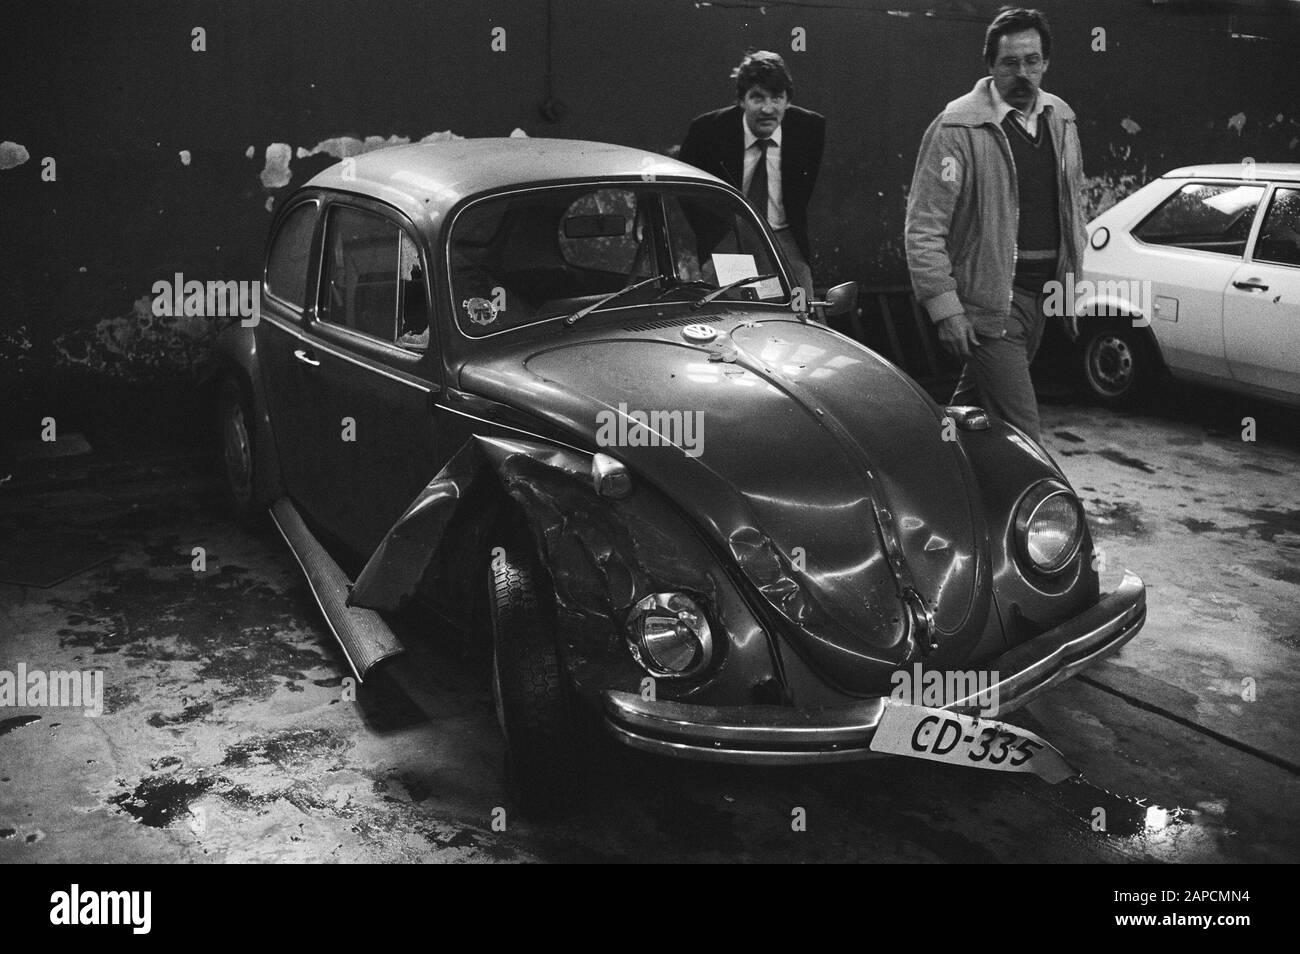 Auto (a VW beetle) of Ahmet Benler, son of Turkish ambassador Özdemir Benler, shot dead in The Hague. The attack was claimed by the Armenian terror organization Asala Description: attacks, ambassadors, sons, terrorism, cars, Benler, Ahmet, Benler, Özdemir Date: October 12, 1979 Location: The Hague, South Holland Keywords: attacks, ambassadors, cars, terrorism, sons Personal name: Benler, Ahmet, Benler, Özdemir Stock Photo